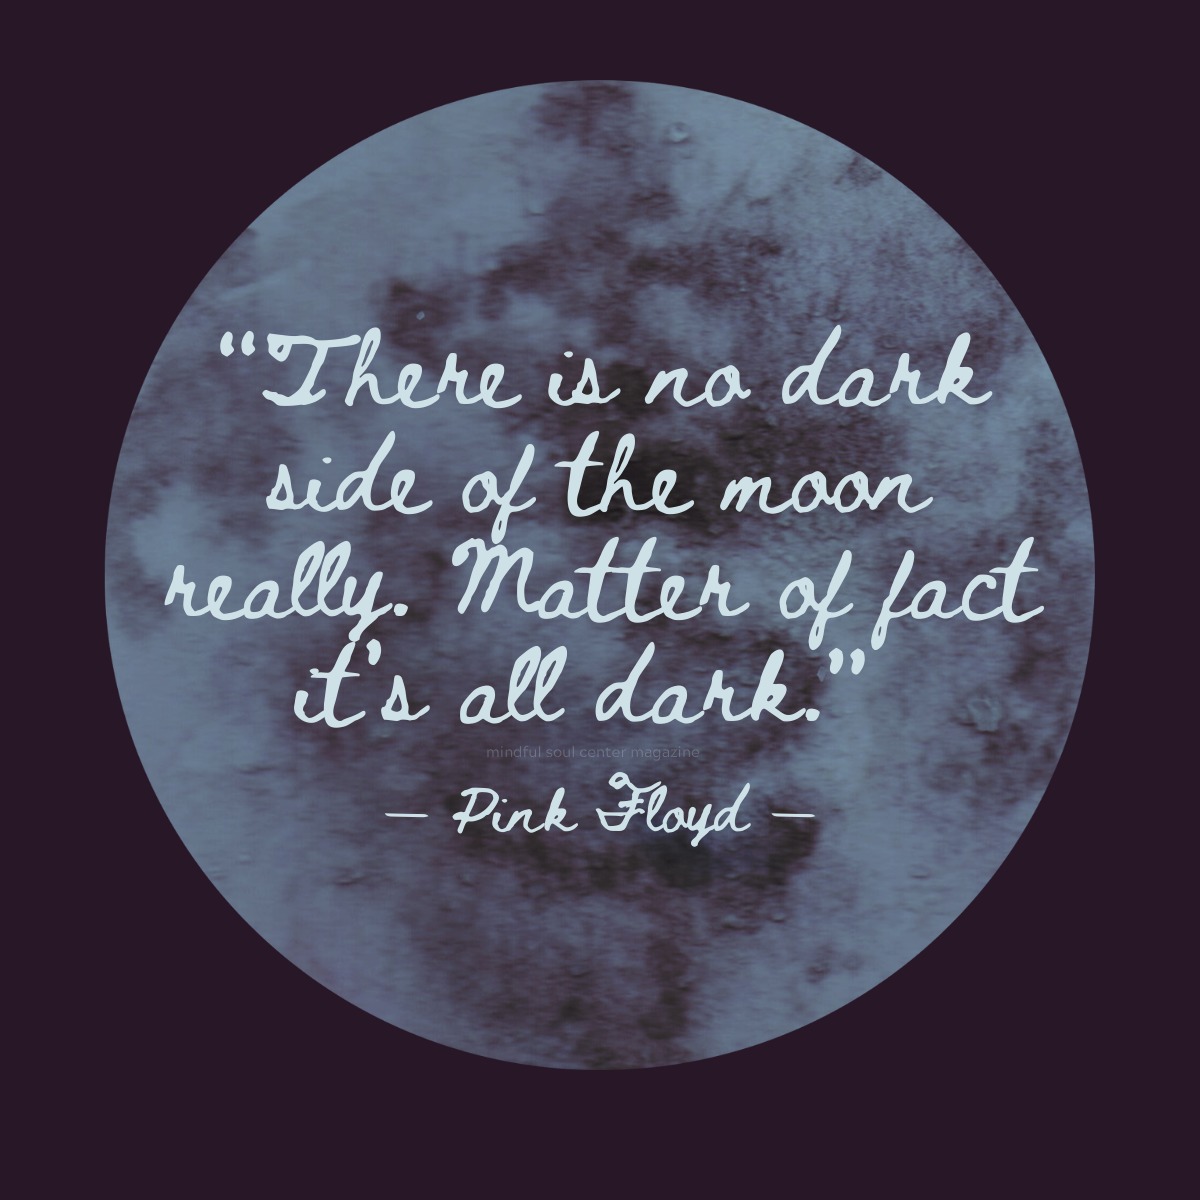 There is no dark side of the moon quote - Pink Floyd